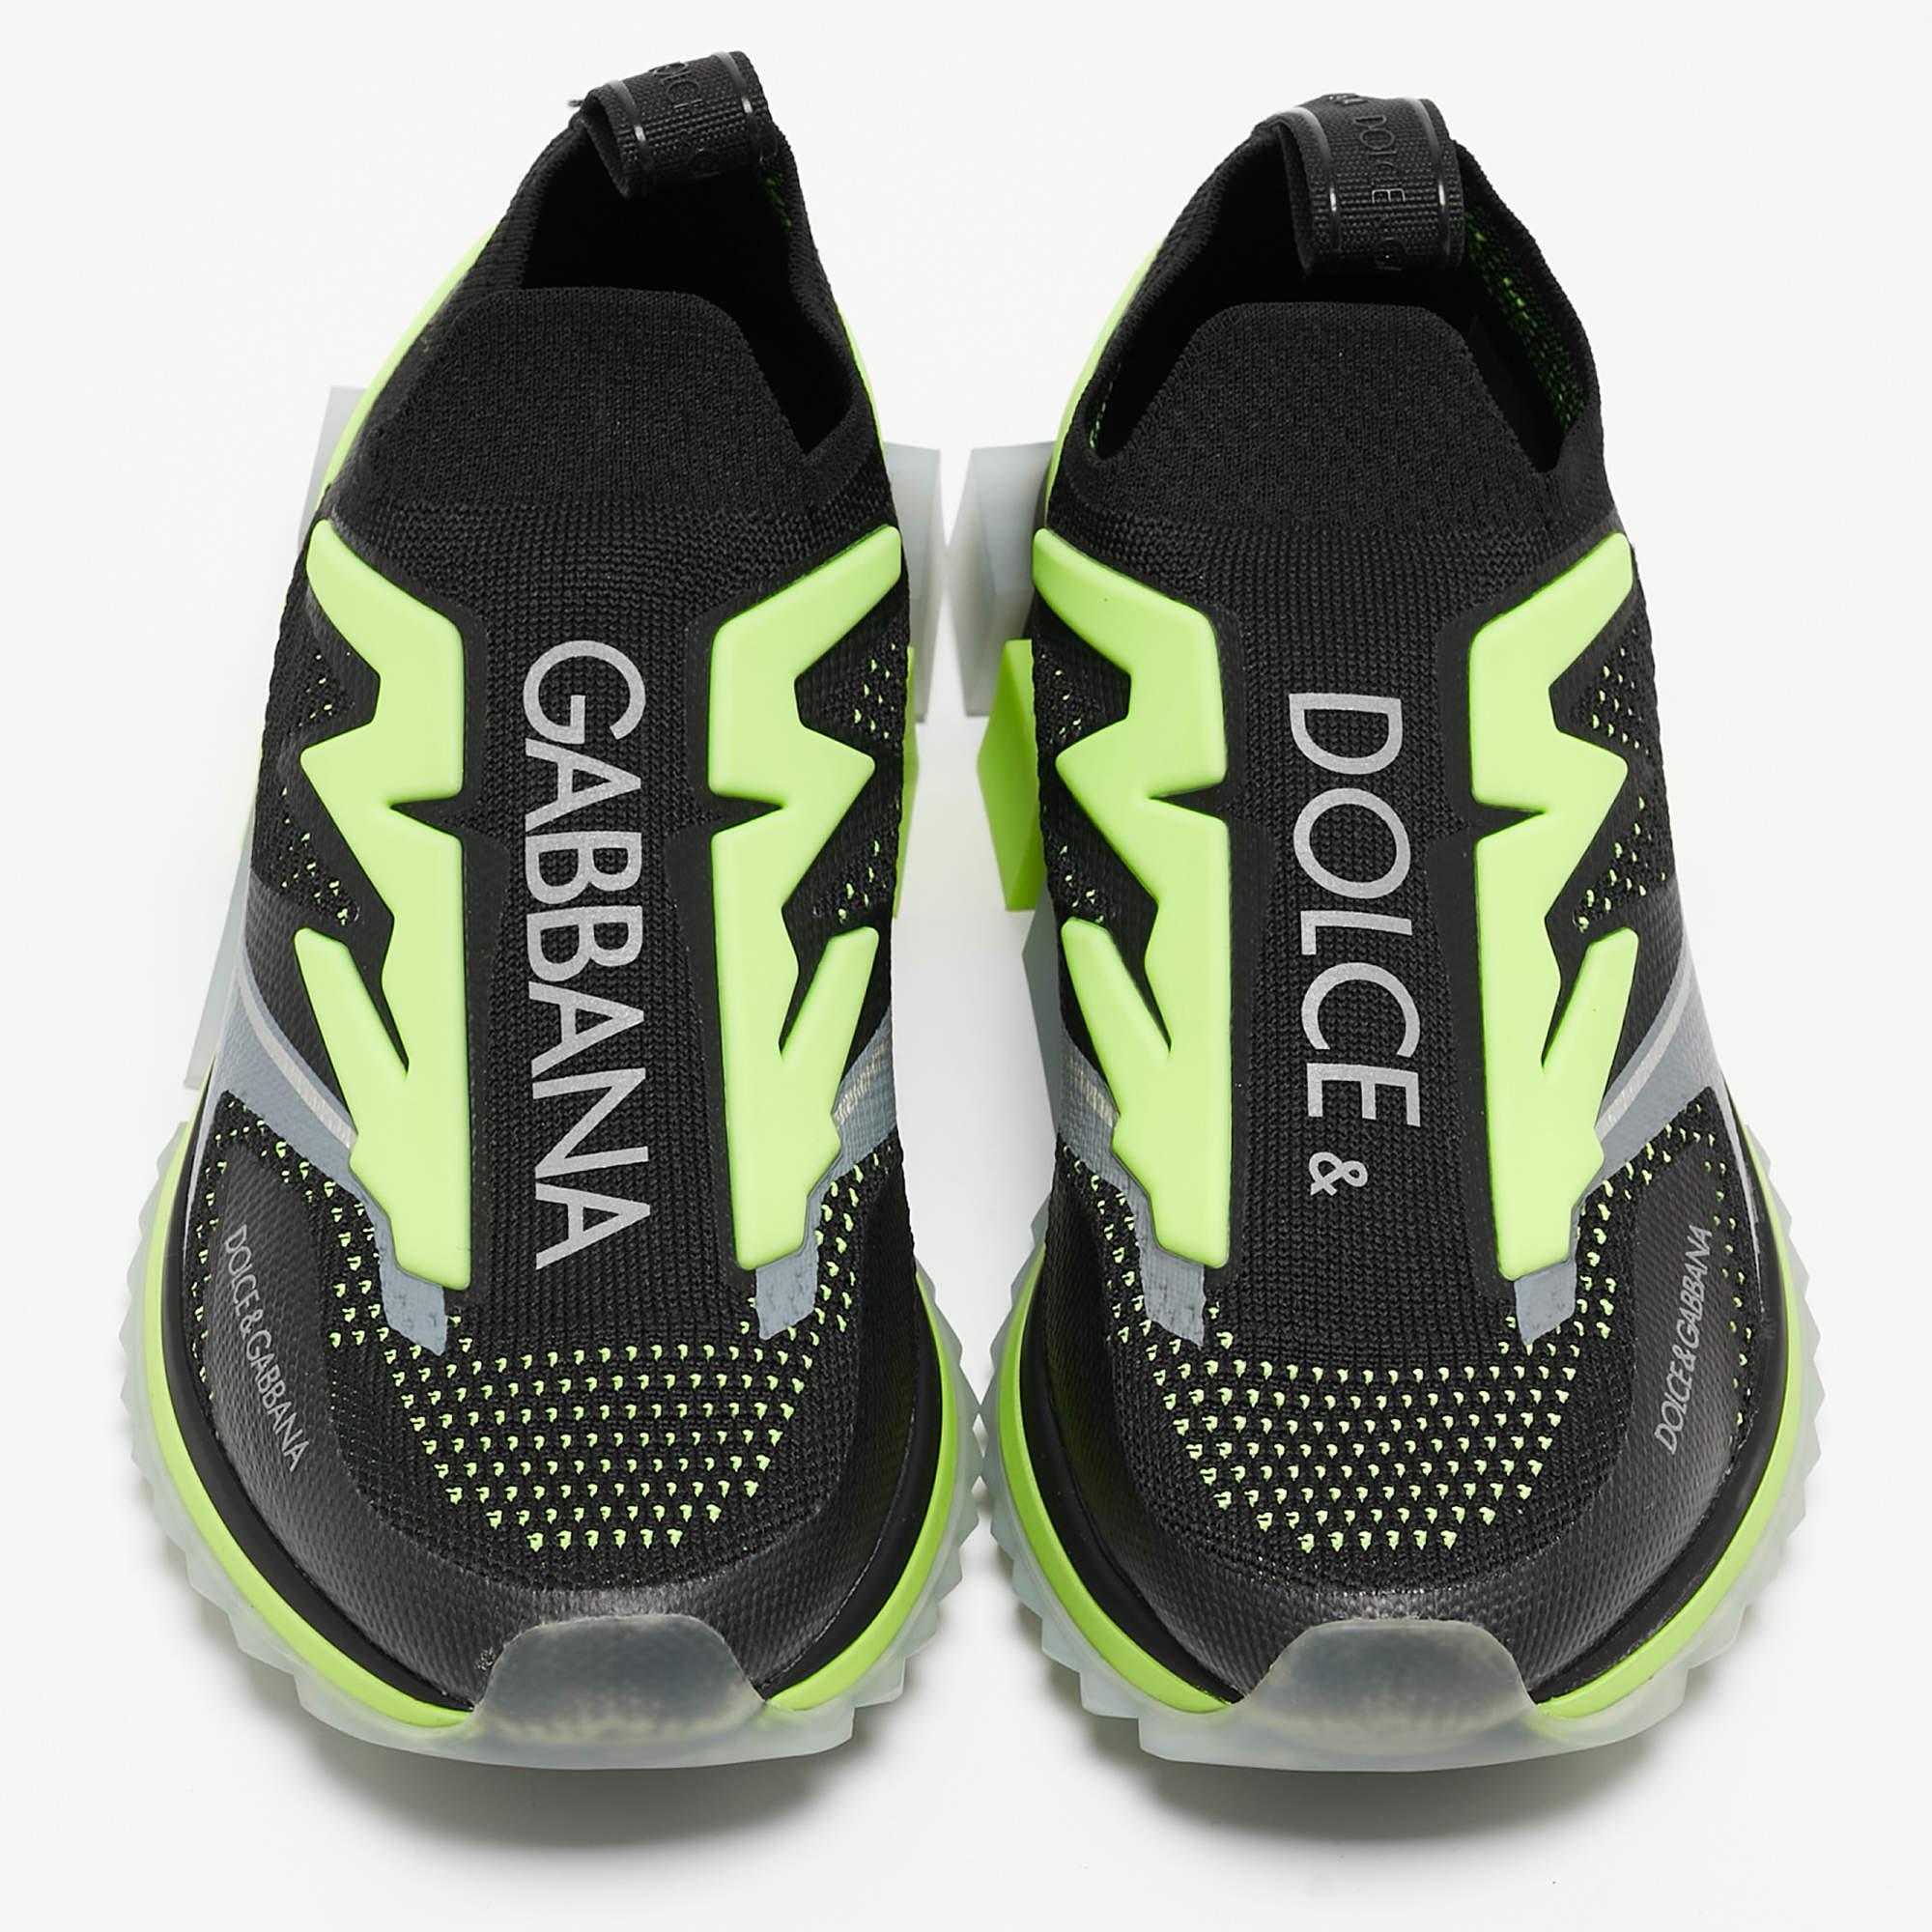 Step into contemporary elegance with Dolce & Gabbana's Sorrento Sneakers. Crafted with precision, these sneakers boast a sleek knit fabric design in a striking black and neon green combination, offering comfort and style in every step with a touch